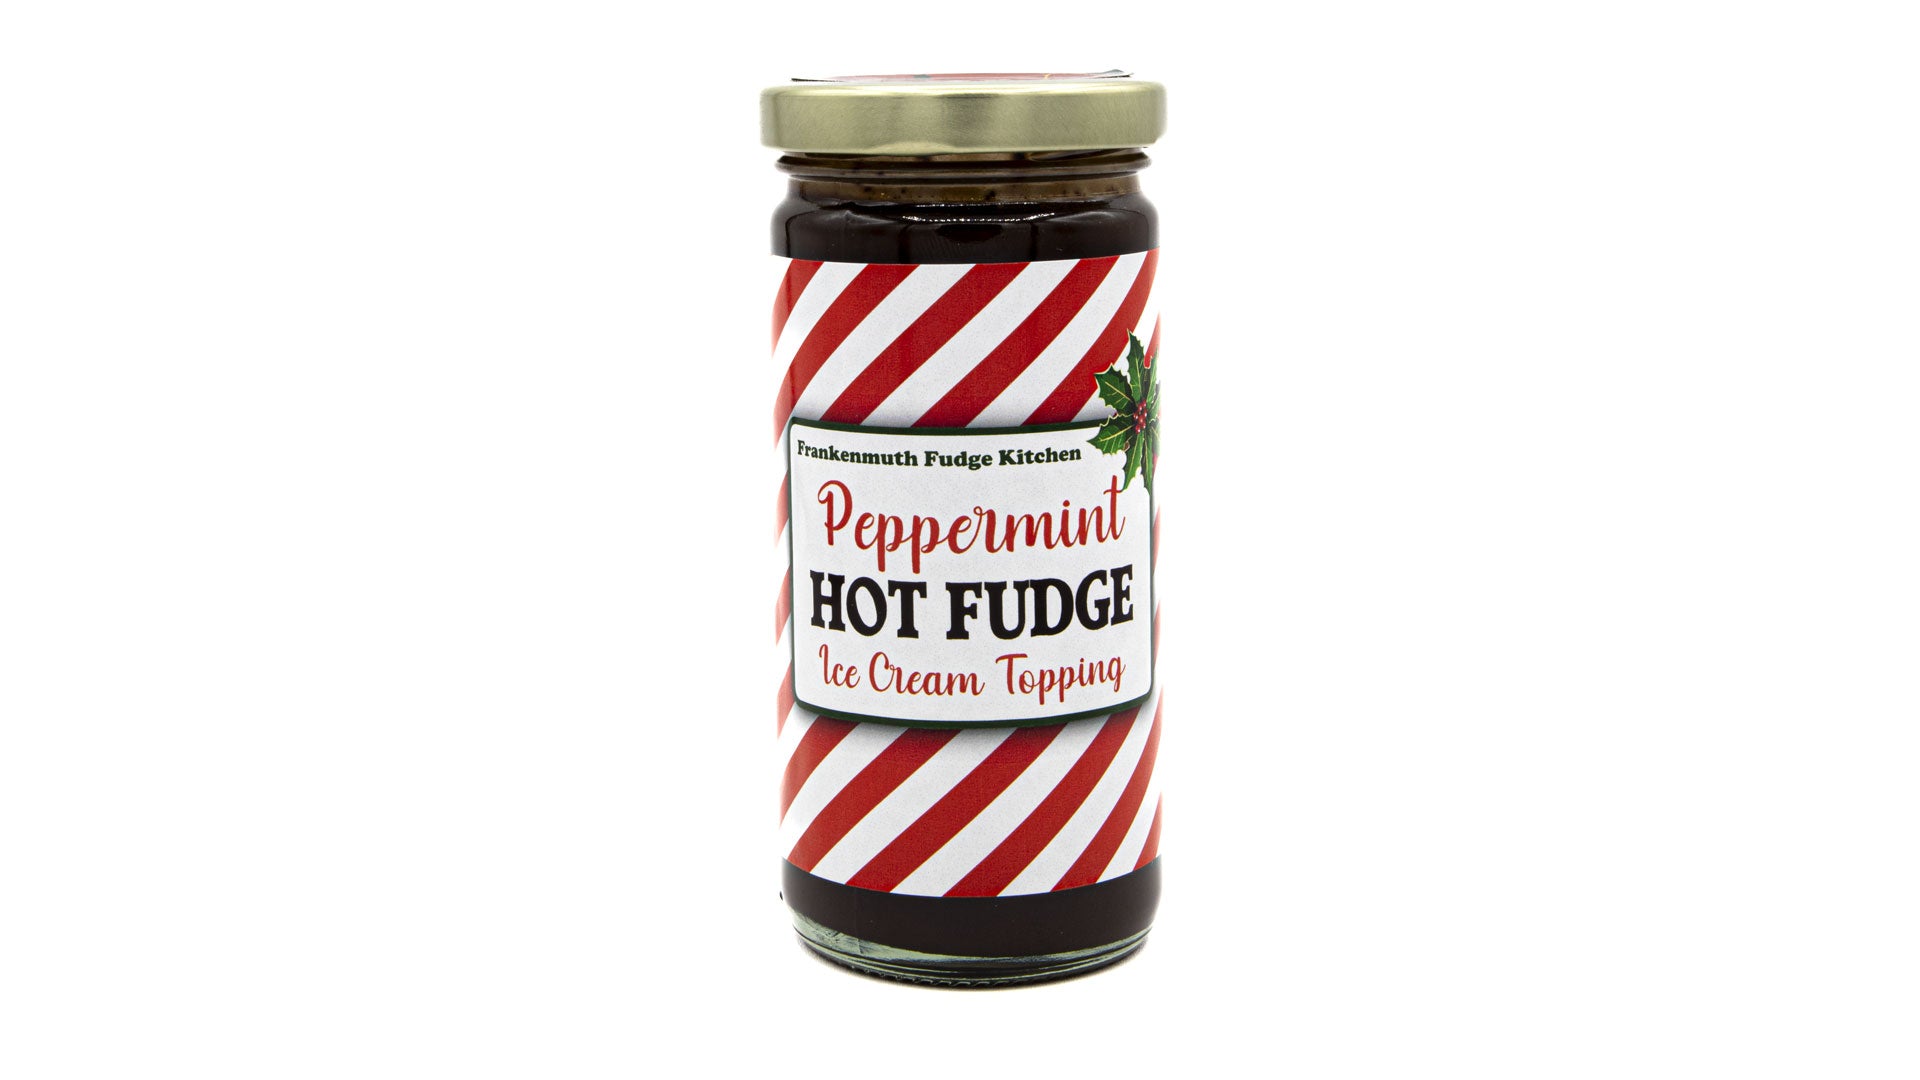 Peppermint Hot Fudge Ice Cream Topping